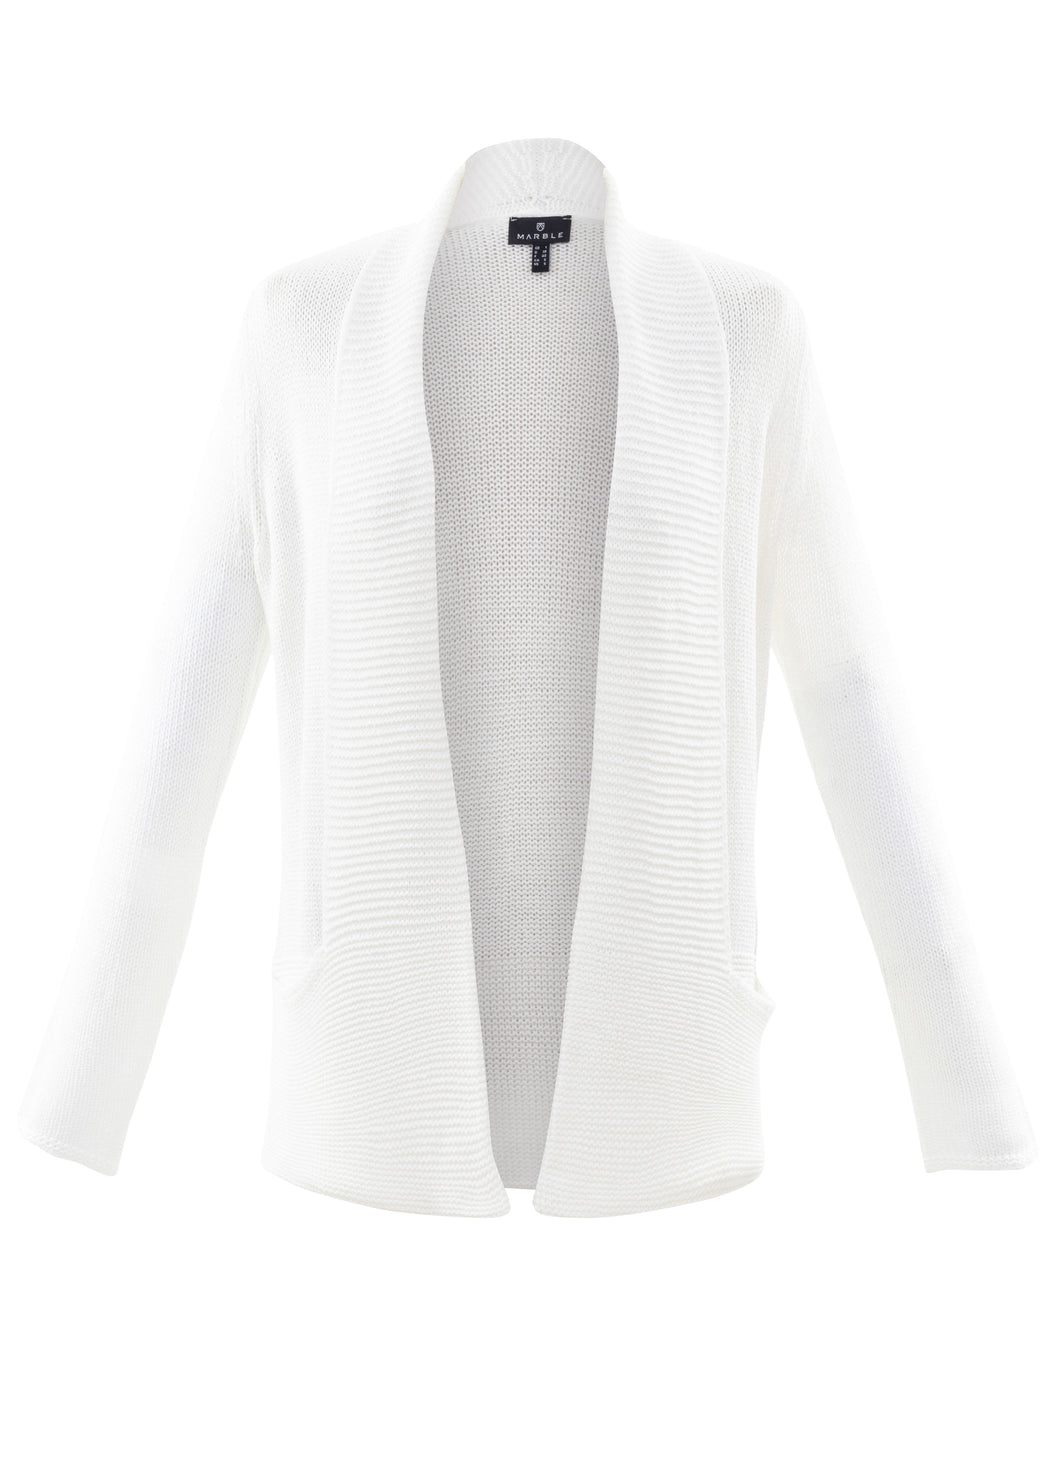 MARBLE CARDIGAN STYLE 6512 COL 102 WHITE